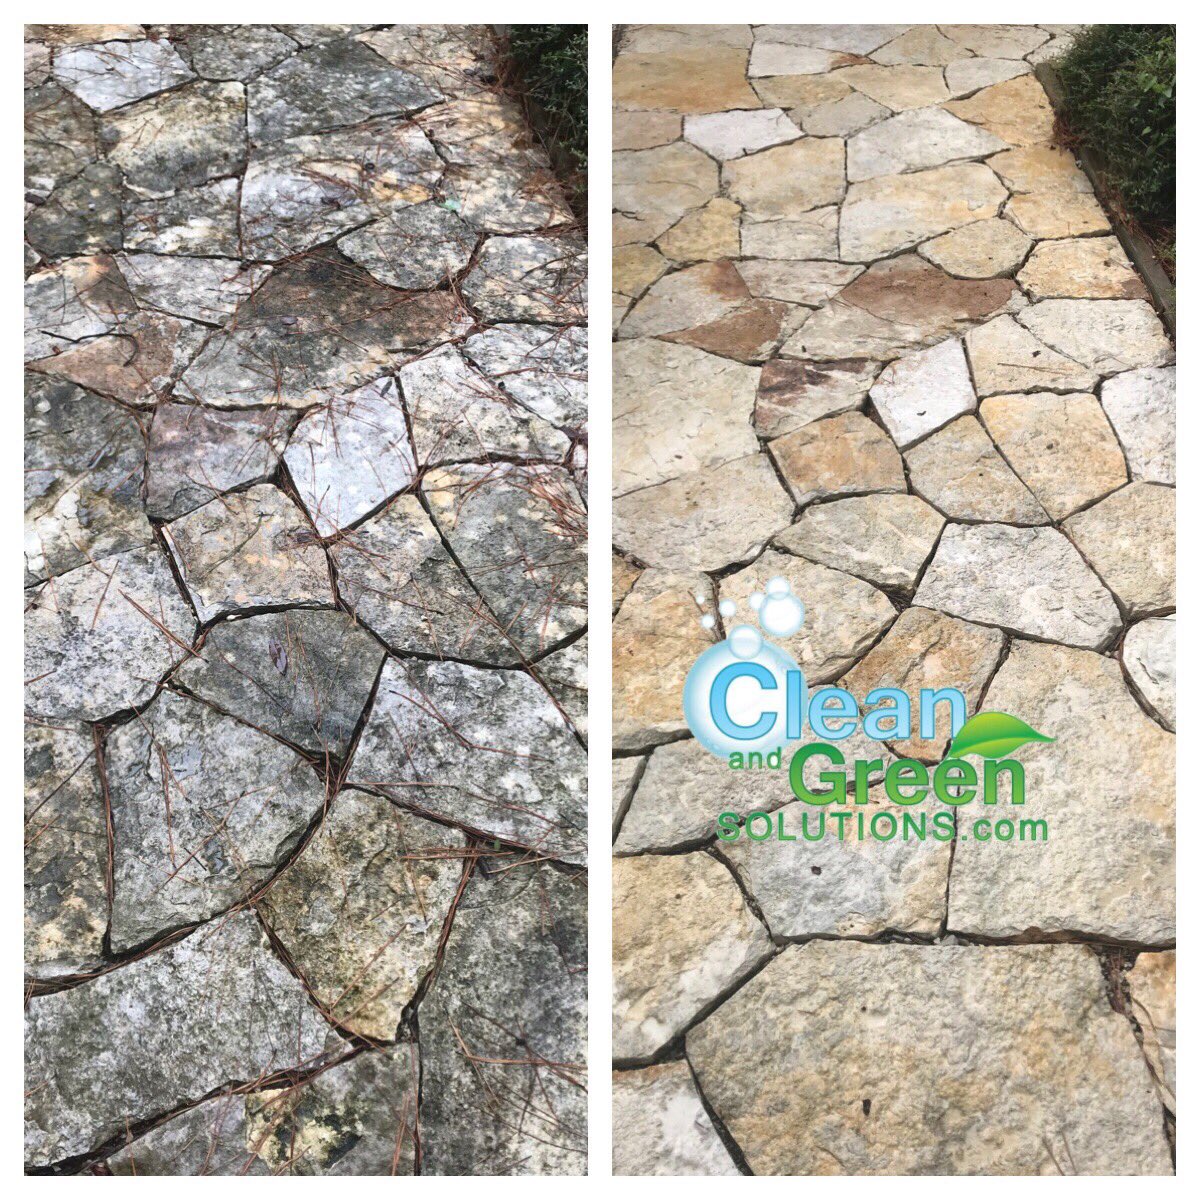 Keeping walkways fresh and bright not only looks a hundred times better, but also prevents slip and fall injury, especially in wet conditions. Call or text 281-883-8470 for a free estimate! #pavers #pressurewashing #sidewalkcleaning #safetypractices